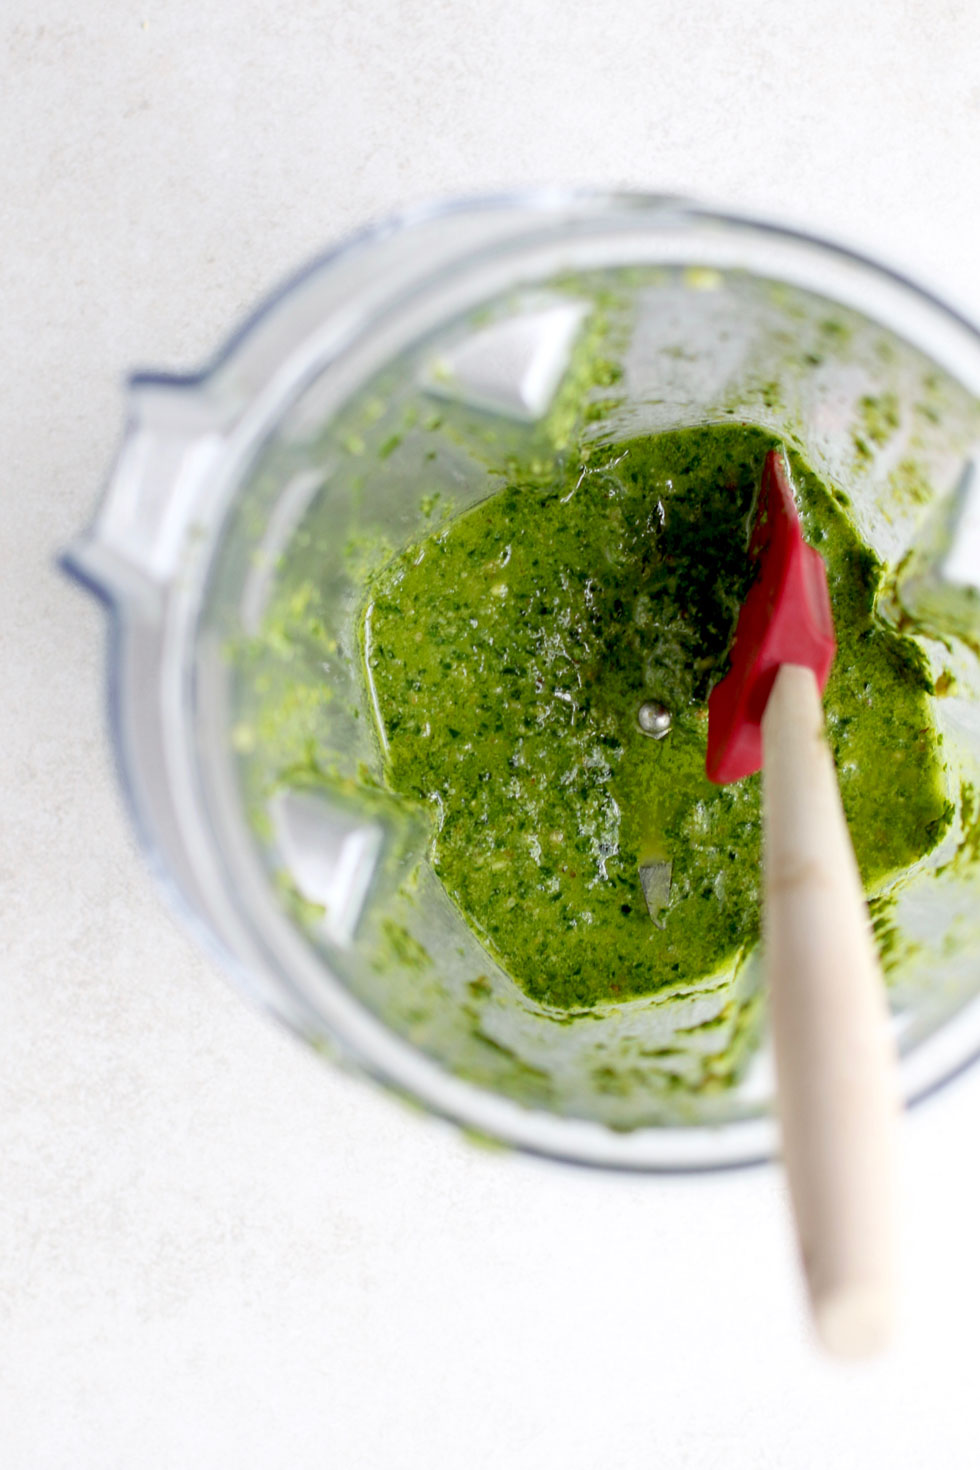 How to make Walnut Pesto in a blender